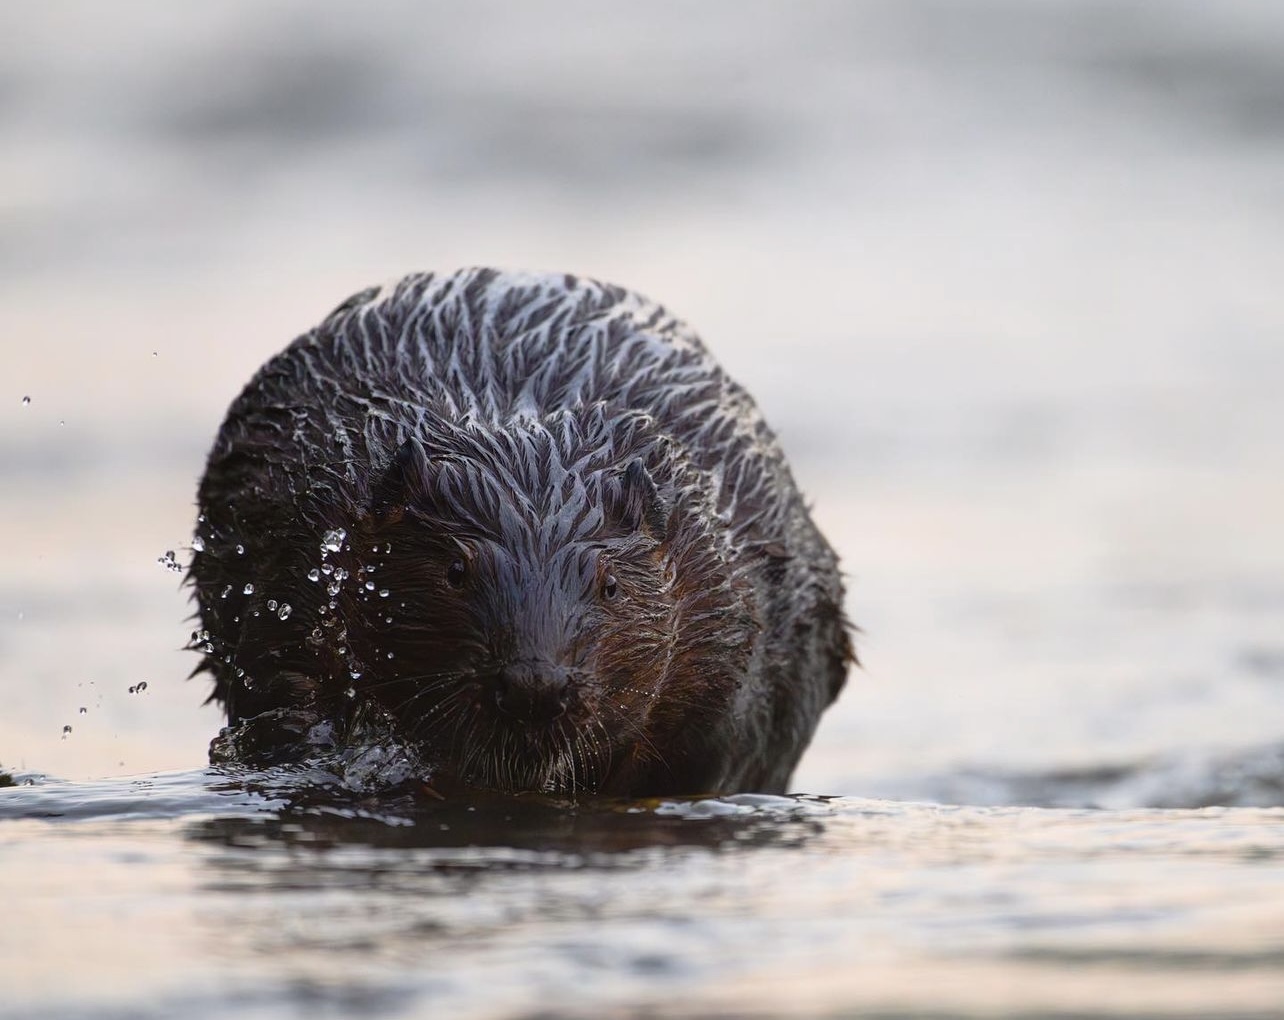 Up-close photo of a beaver in water.